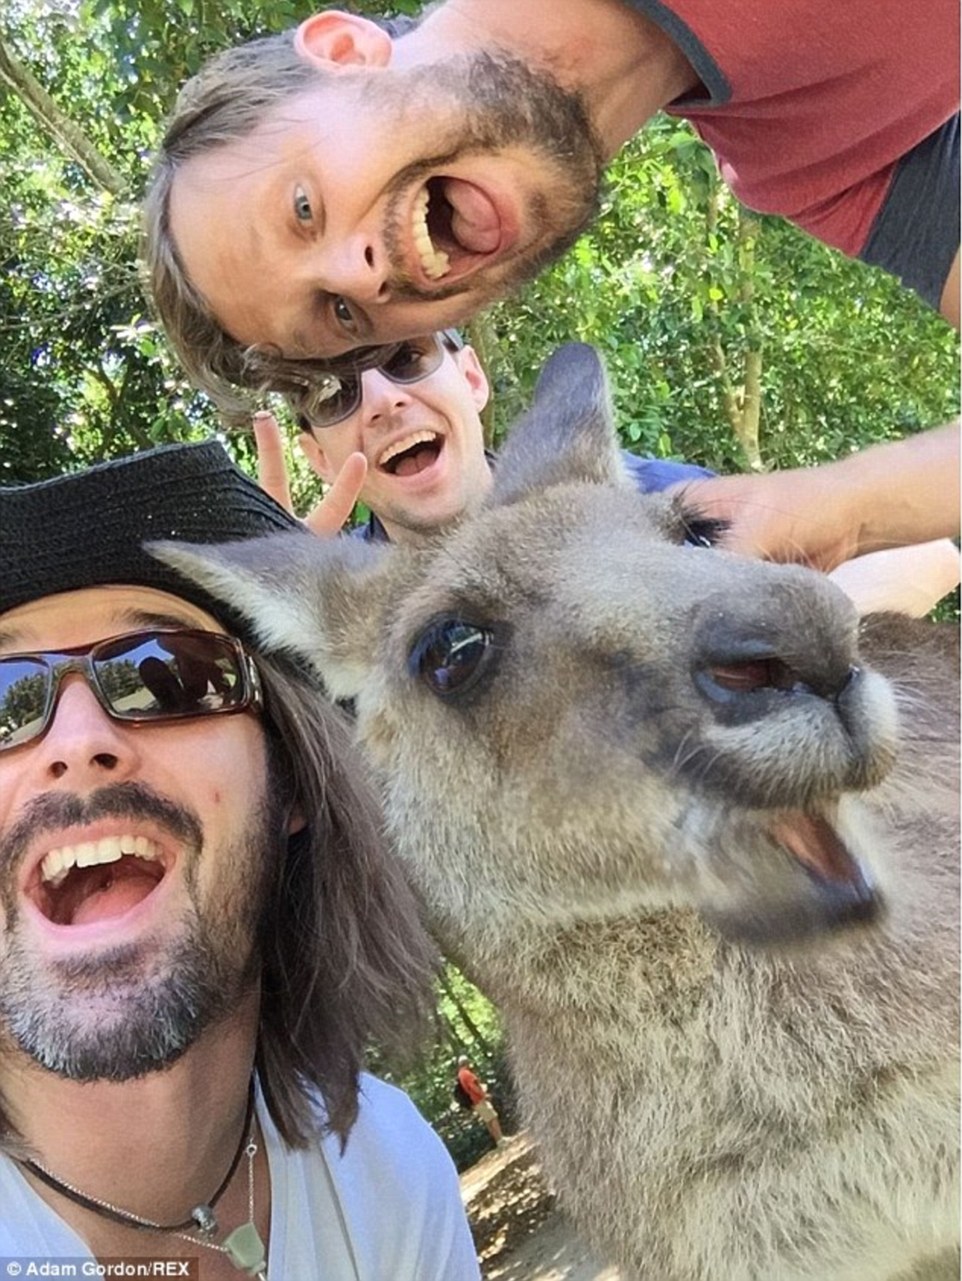 The mob: A kangaroo grins hilariously at the exact moment the photo was taken, resulting in a brilliant photo of the roo and his buddies